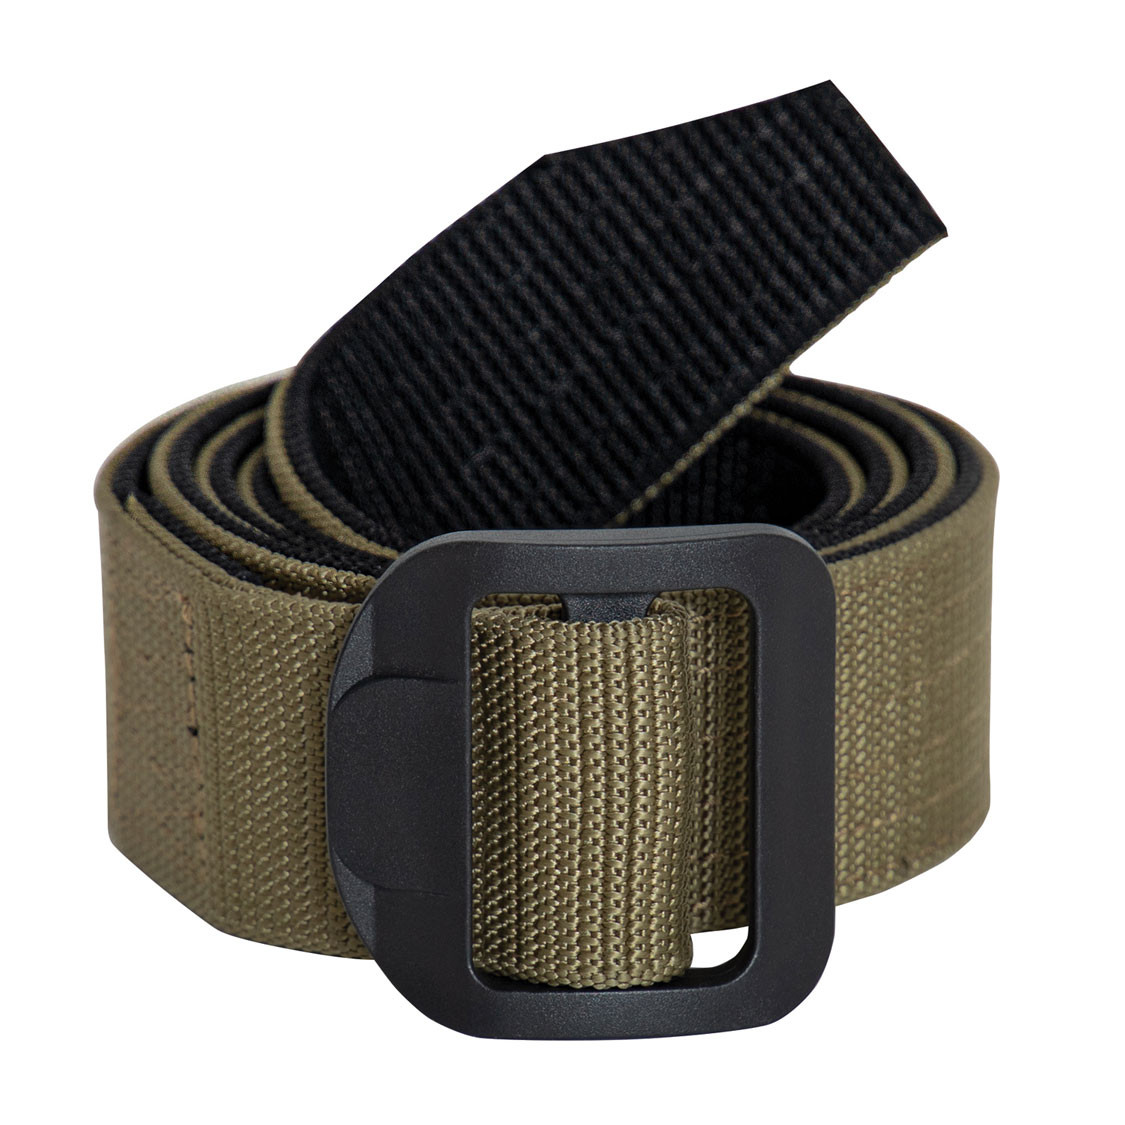 Shop Airport Friendly Belts - Fatigues Army Navy